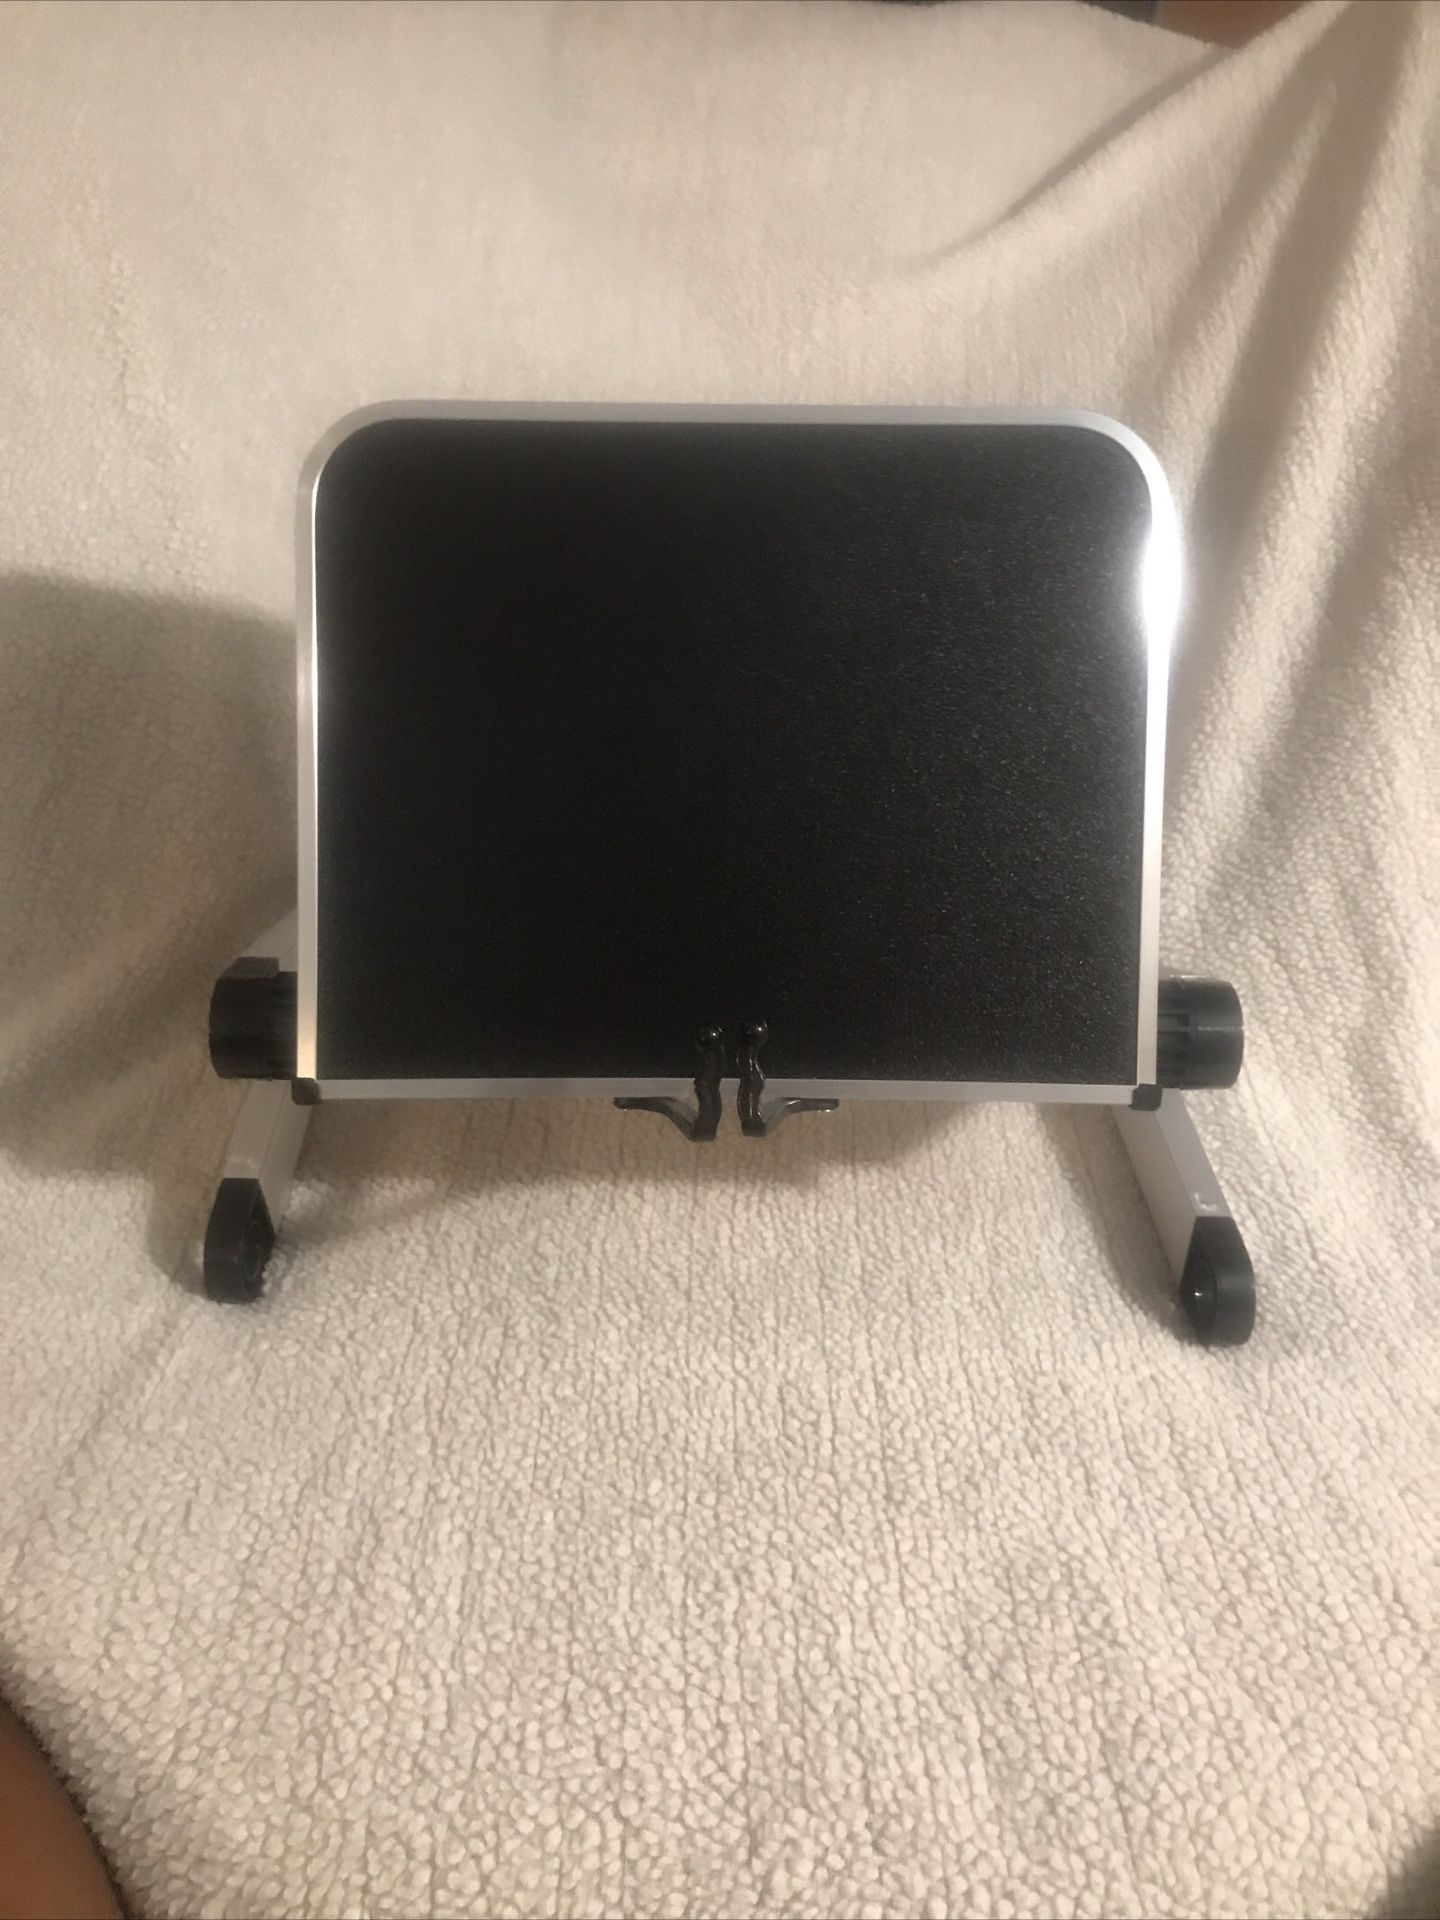 360 Degree Portable Foldable Laptop Tablet Stand For Table, Couch, Chair Or Etc.BLK